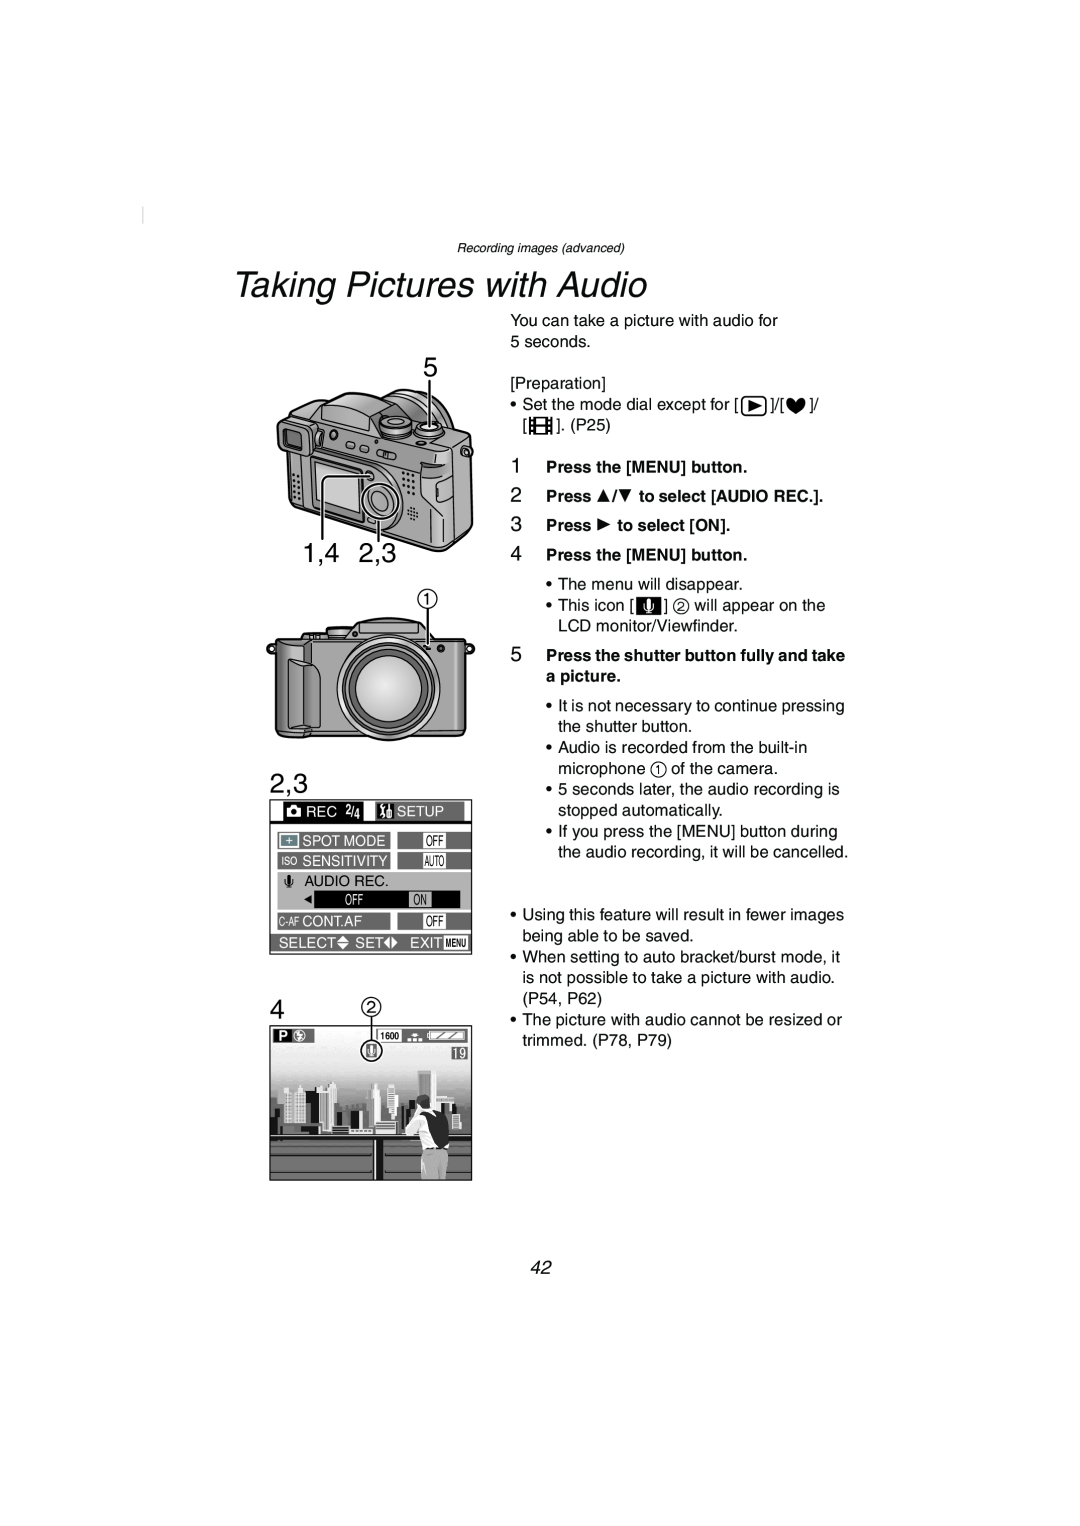 Panasonic DMC-FZ2PP Taking Pictures with Audio, 1,4 2,3, Press the MENU button 2 Press 3/4 to select AUDIO REC 